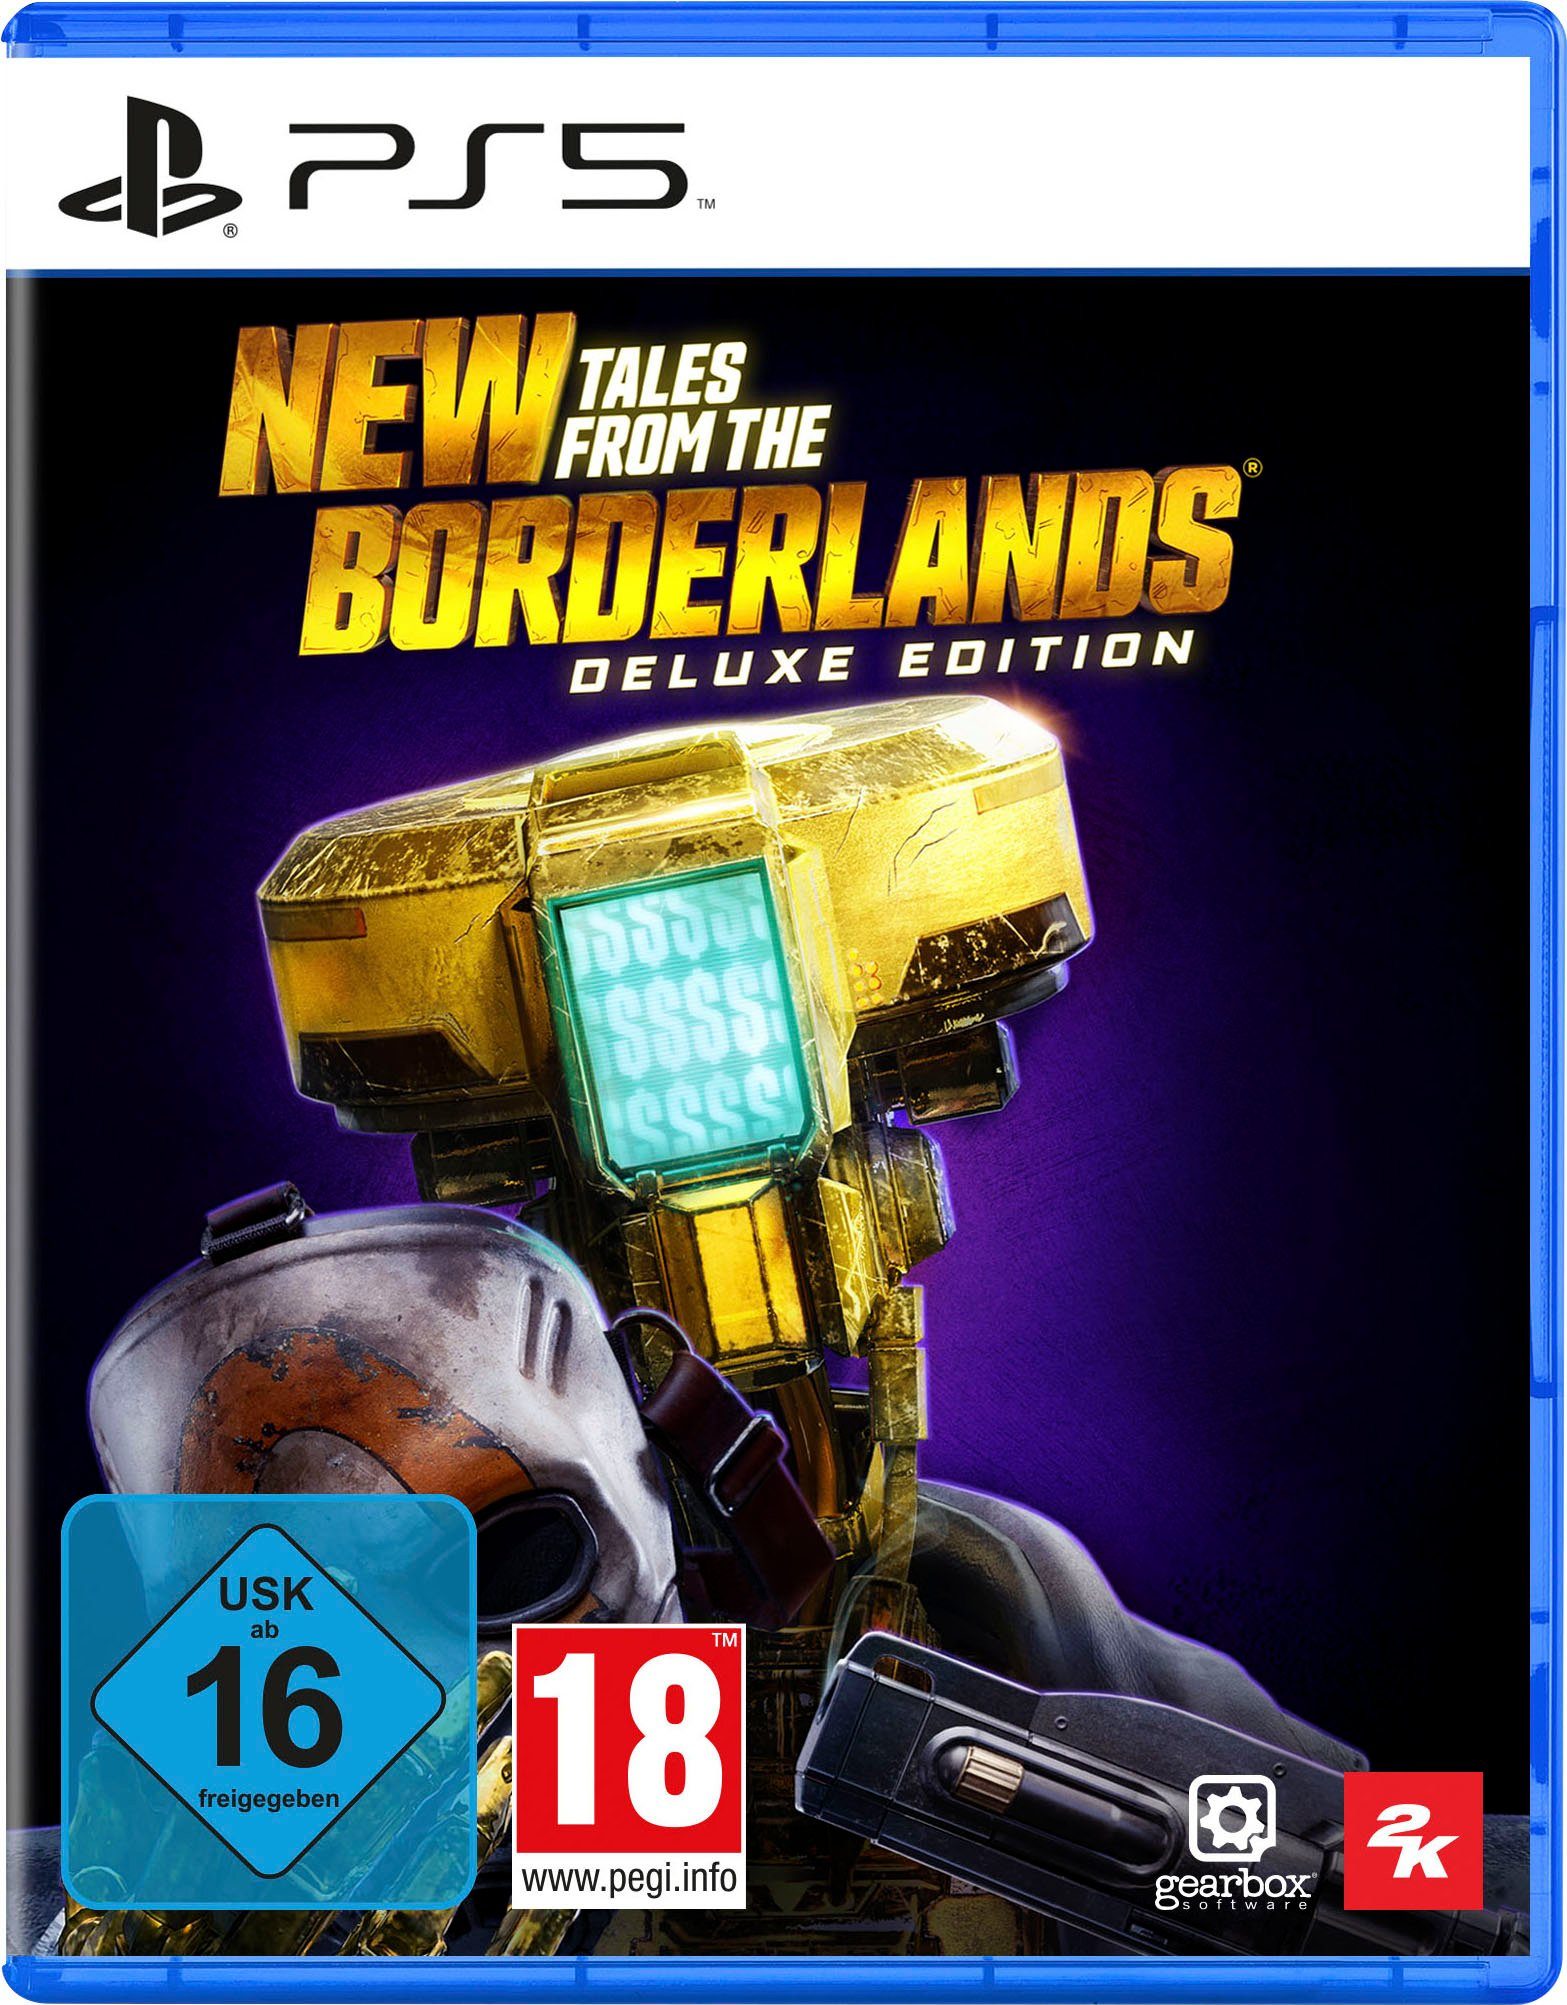 2K New Tales from the 5 PlayStation Borderlands Deluxe